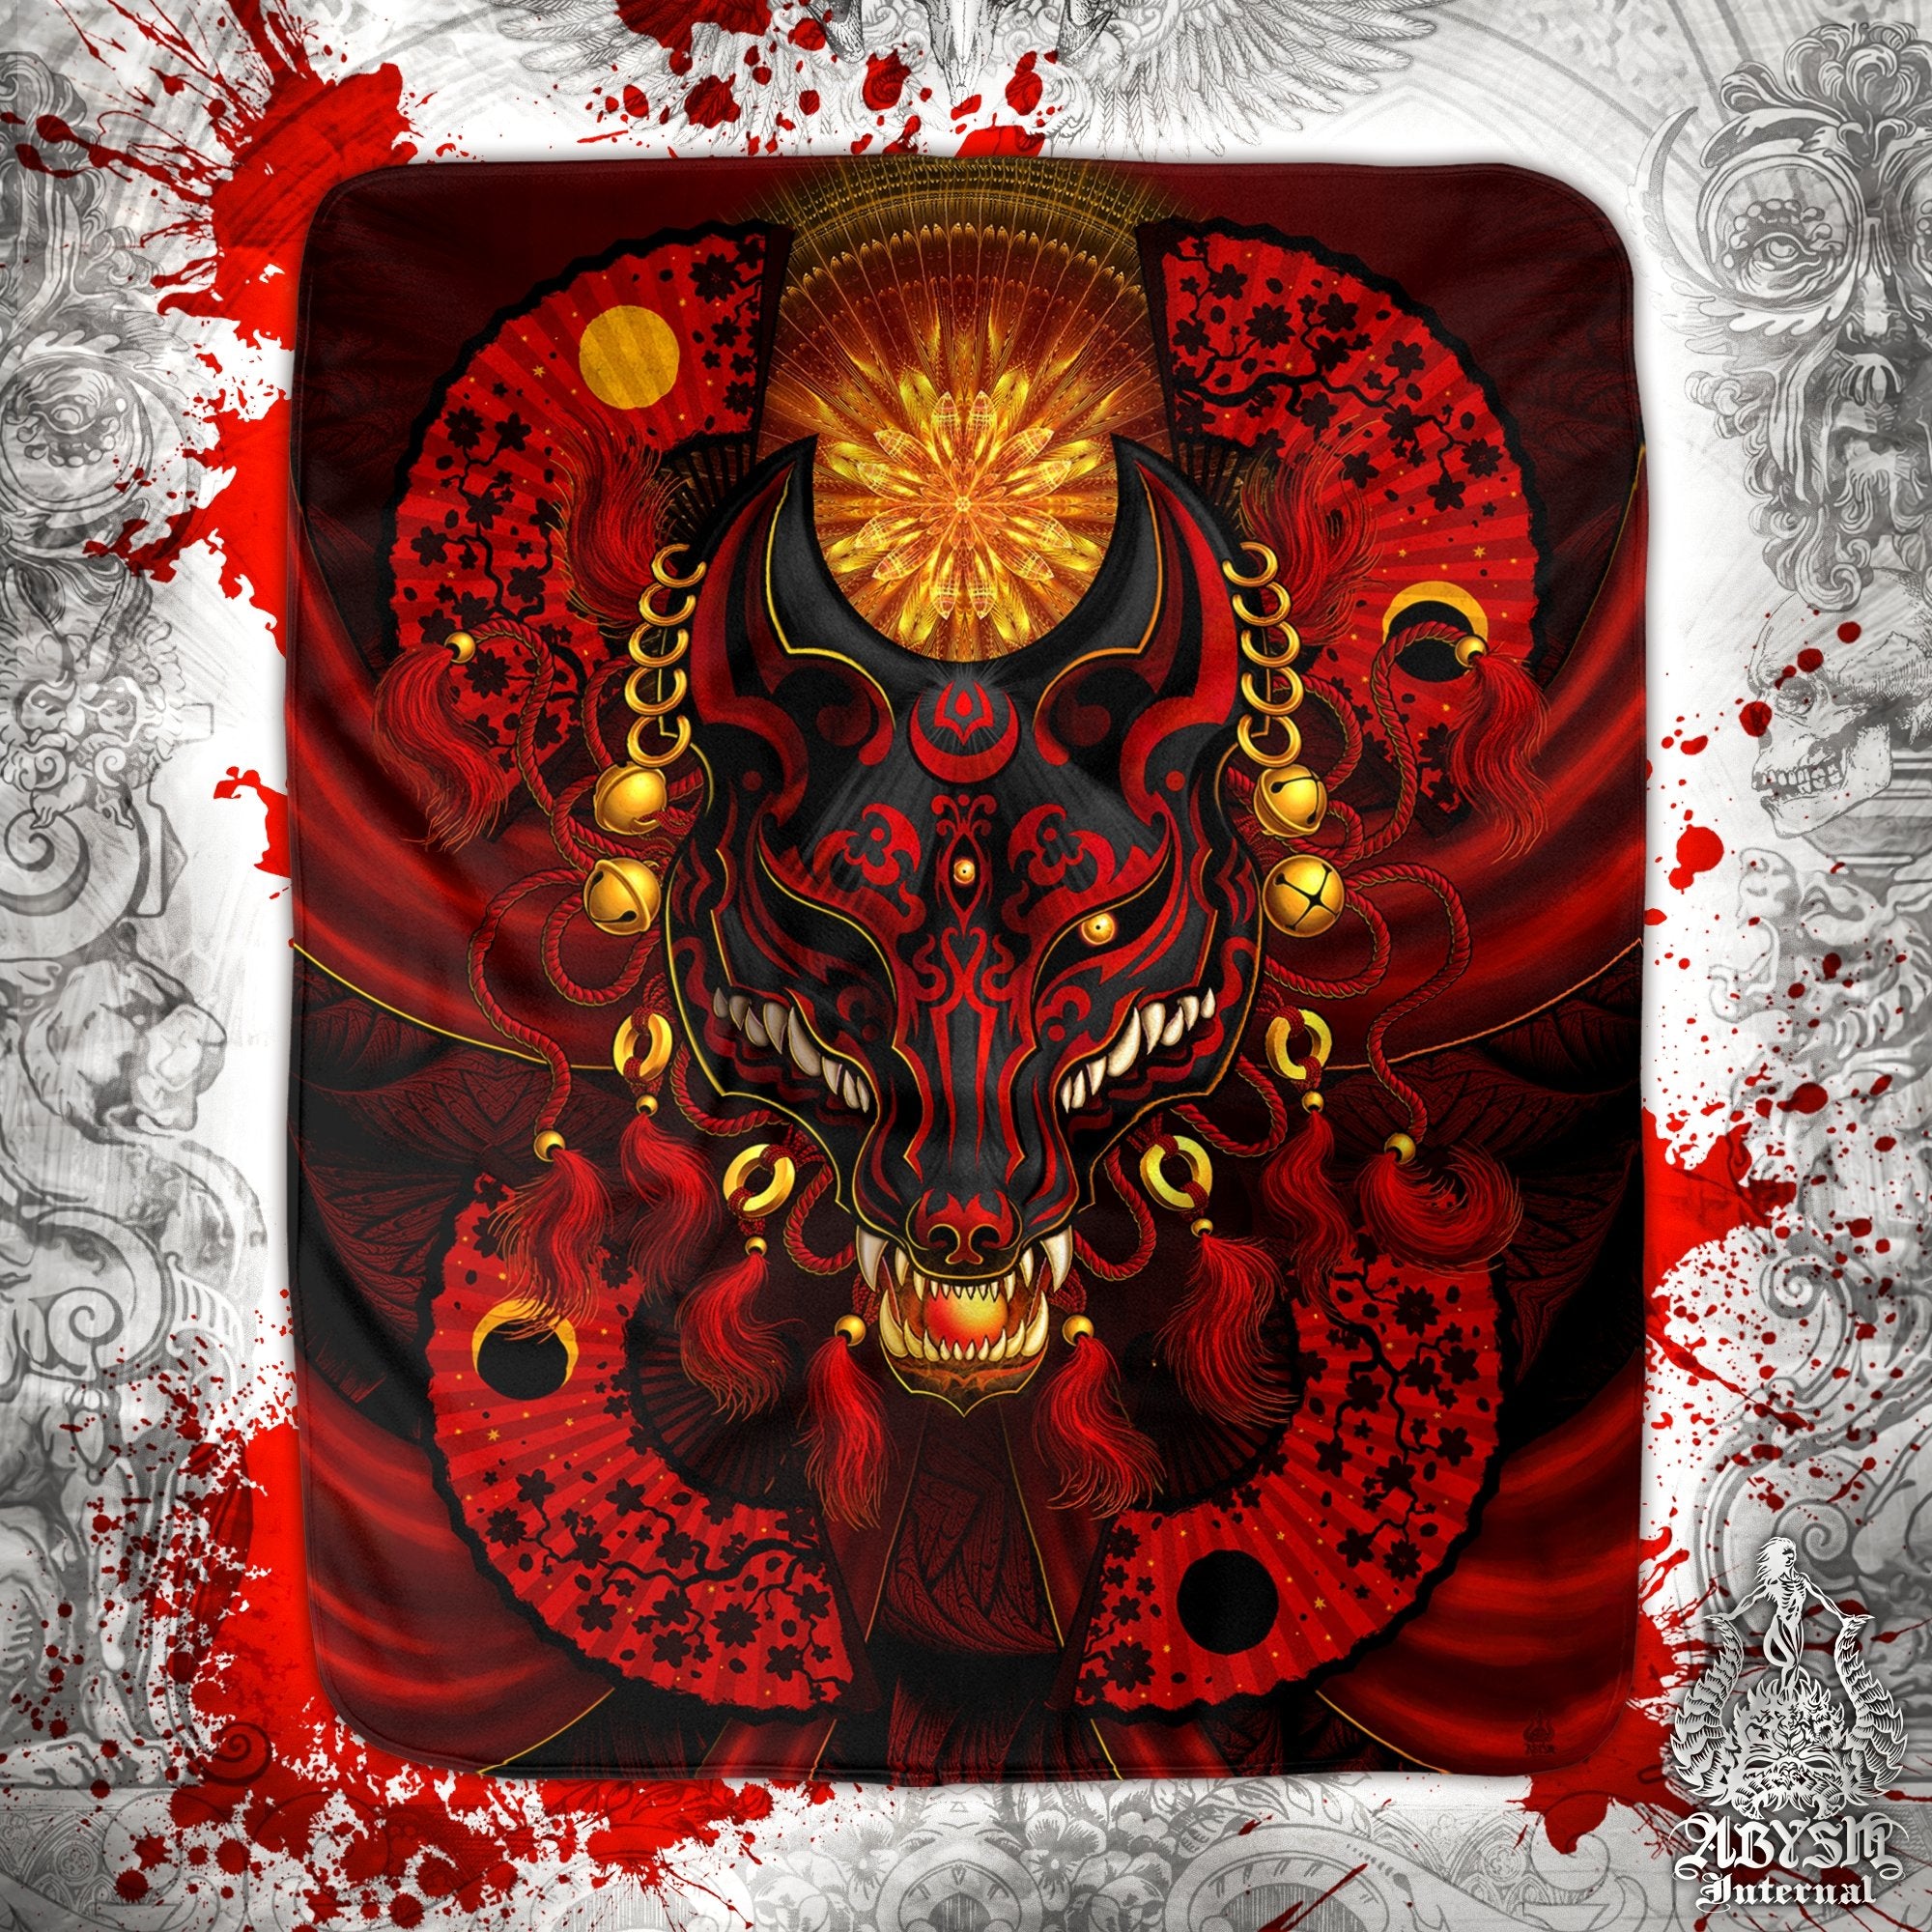 Kitsune Throw Fleece Blanket, Okami, Japanese Fox Mask, Anime and Gamer Decor, Eclectic and Funky Gift - Red & Black - Abysm Internal